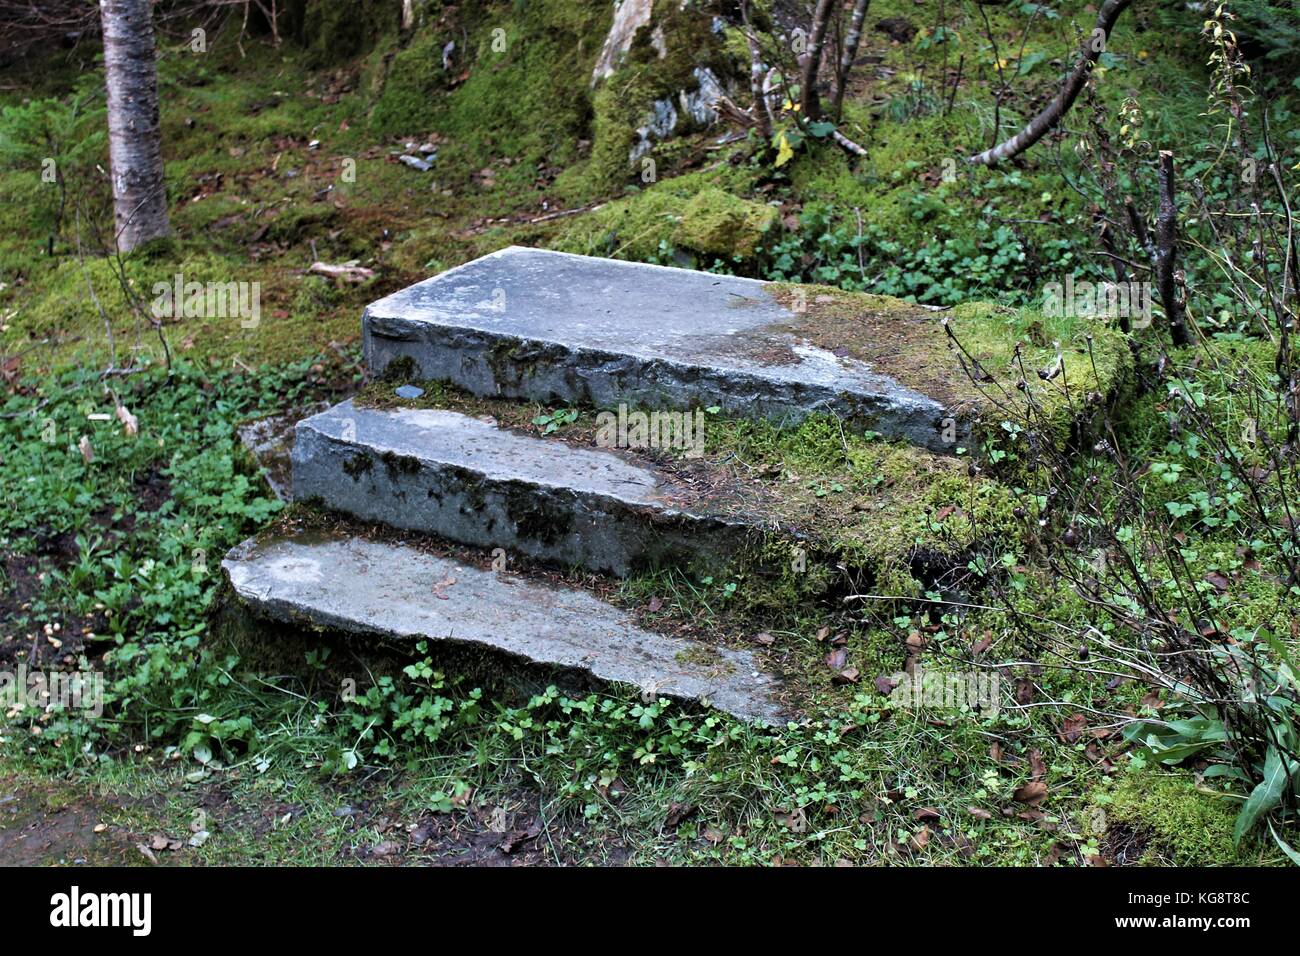 A stone staircase in the forest is all that remains of a house that had once stood in that location, in the abandoned settlement of La Manche, NL. Stock Photo